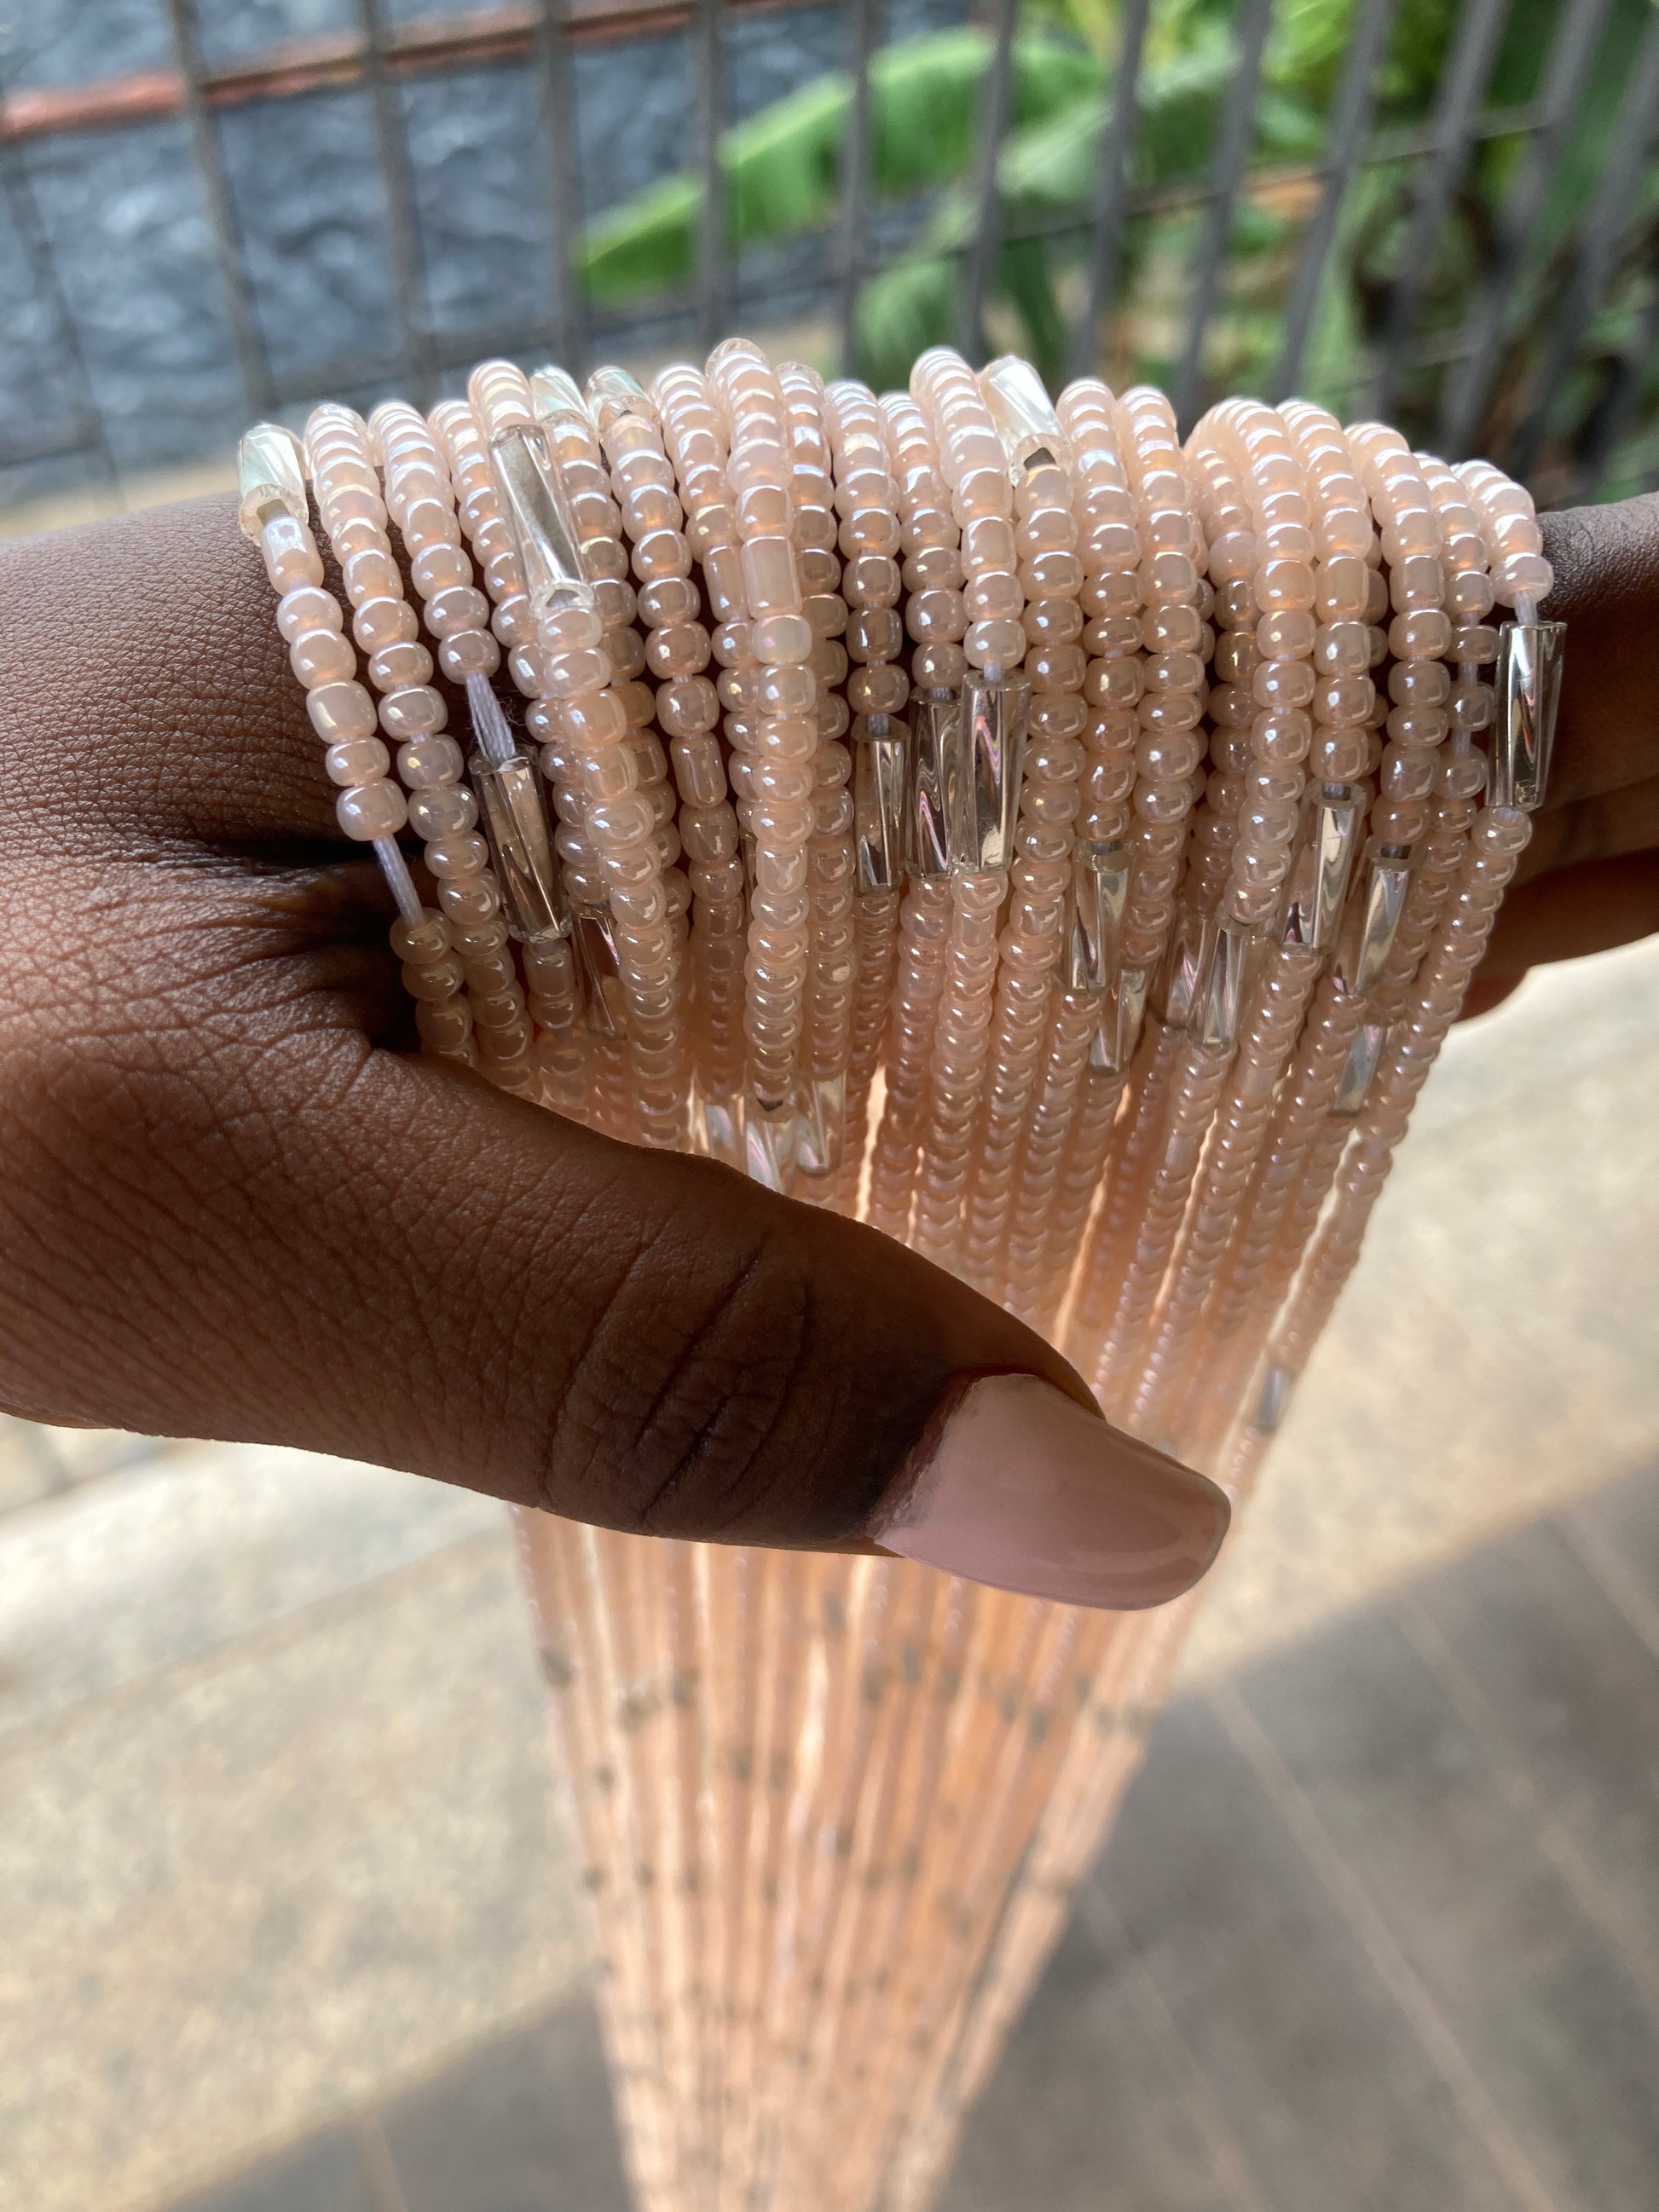 African Waist Beads Color Meaning – KENTELL